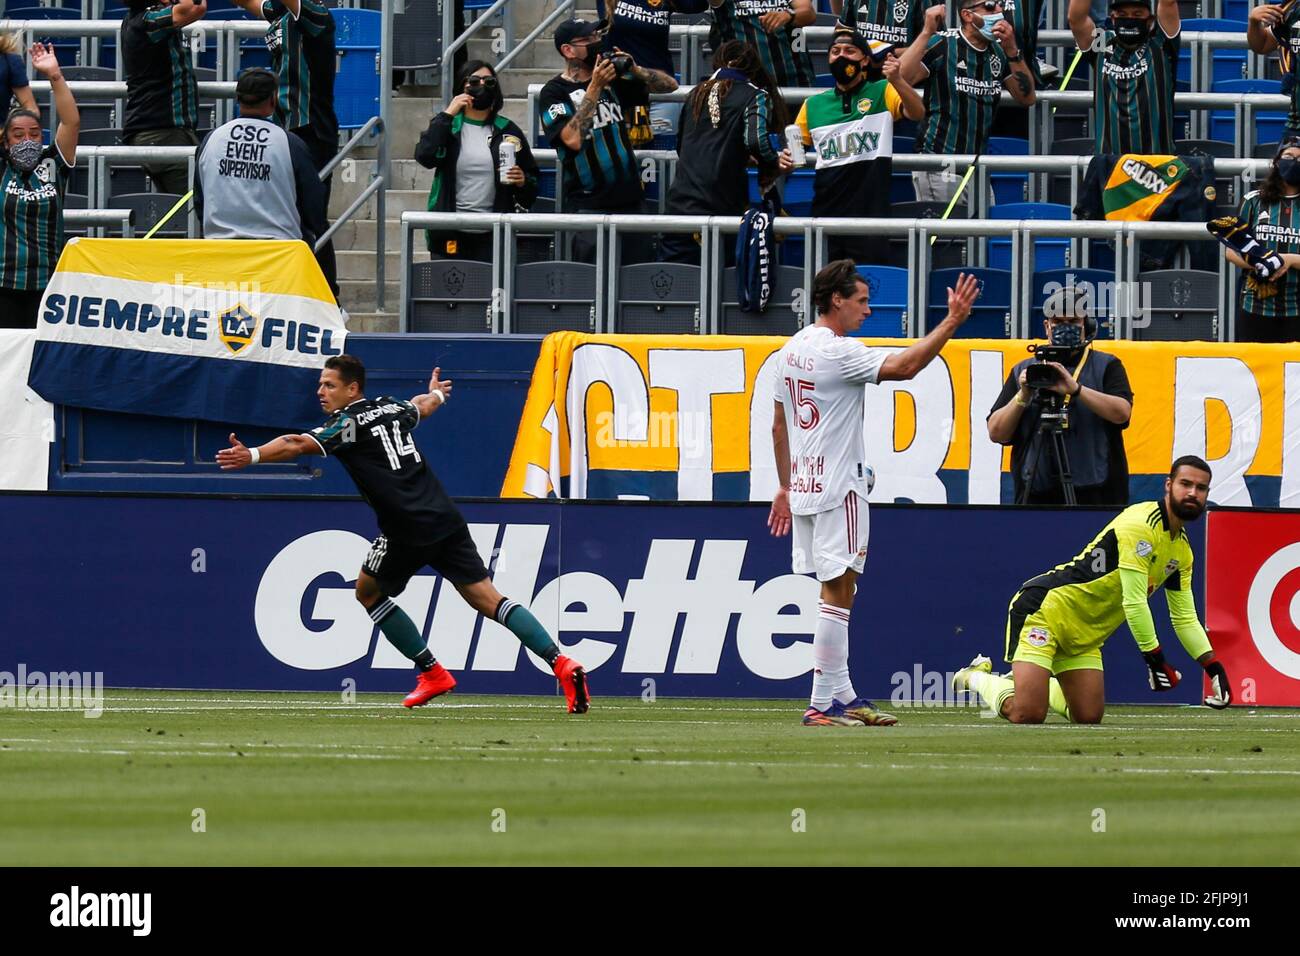 Carson, California, USA. 25th Apr, 2021. LA Galaxy forward Javier ''Chicharito'' Hernandez (14) celebrates his gaol against the New York Red Bulls during the first half of an MLS soccer match, Sunday, April 25, 2021, in Carson, Calif. Credit: Ringo Chiu/ZUMA Wire/Alamy Live News Stock Photo